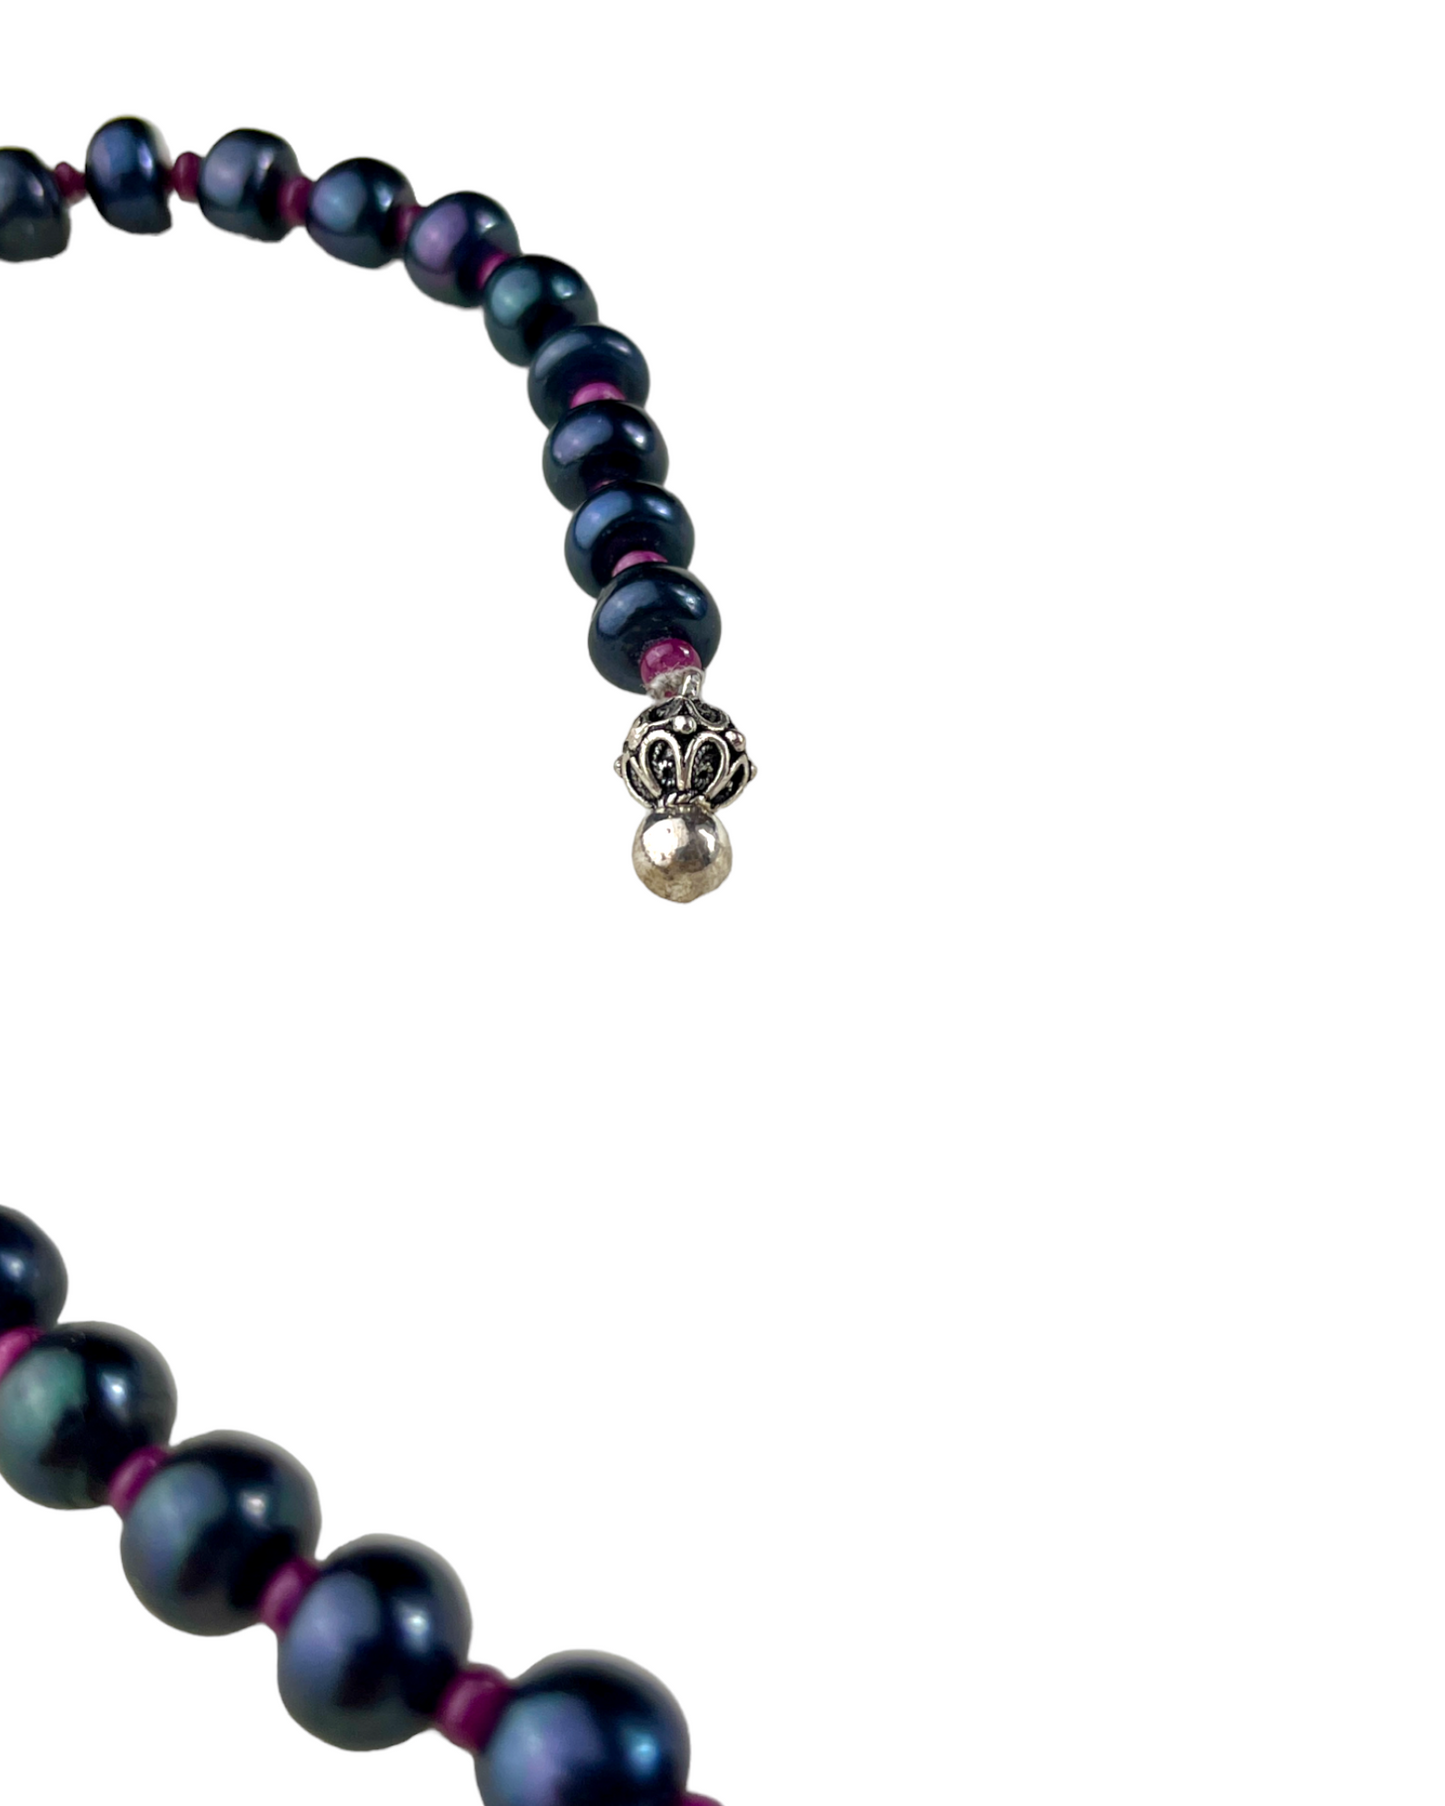 Namazte Majestic Rosary with Rubys, Turquoise and Pearls